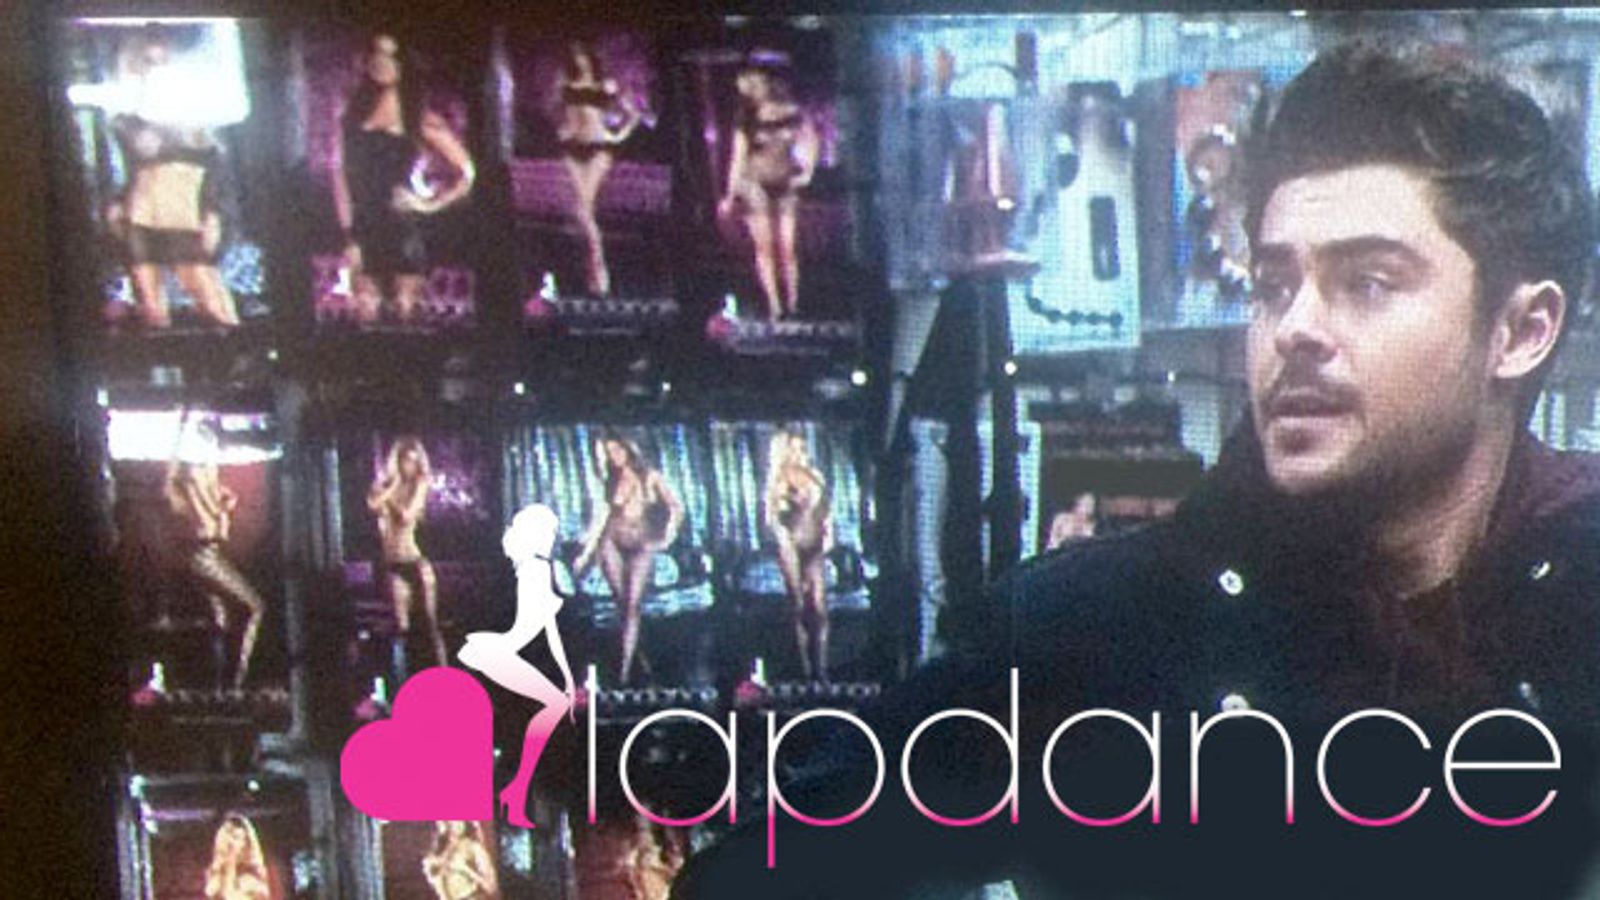 Lapdance Lingerie Featured in Mainstream Comedy 'Neighbors'